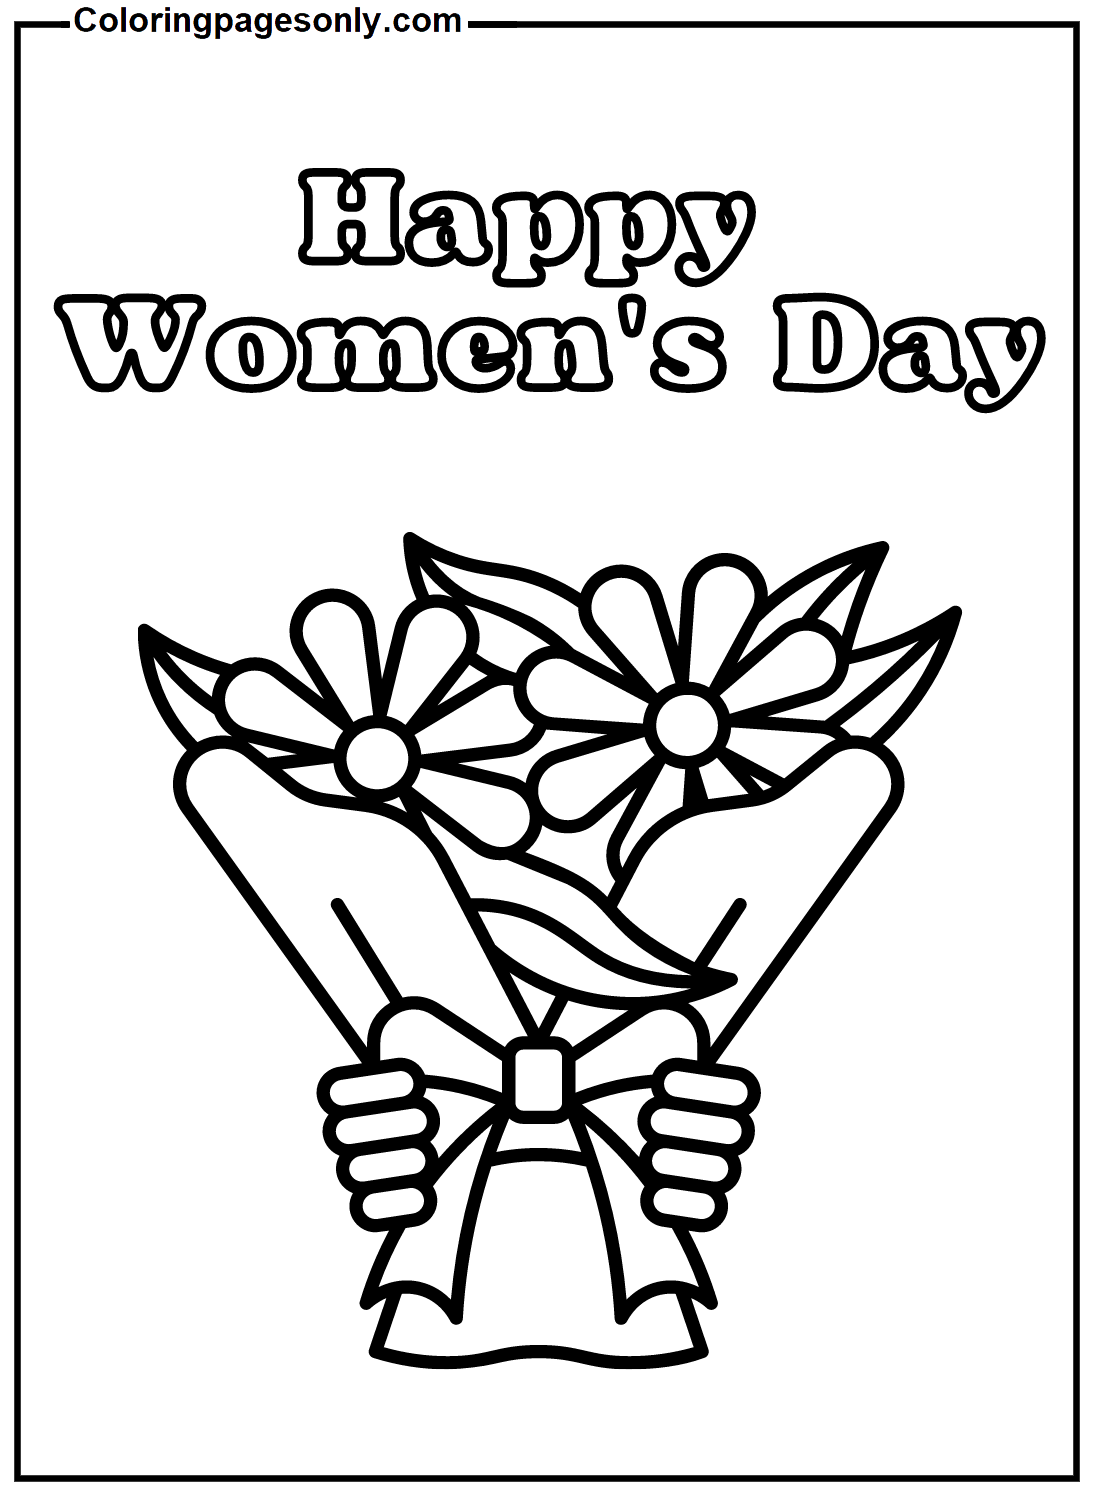 Printable Happy Women’s Day Image from Women's Day 2024